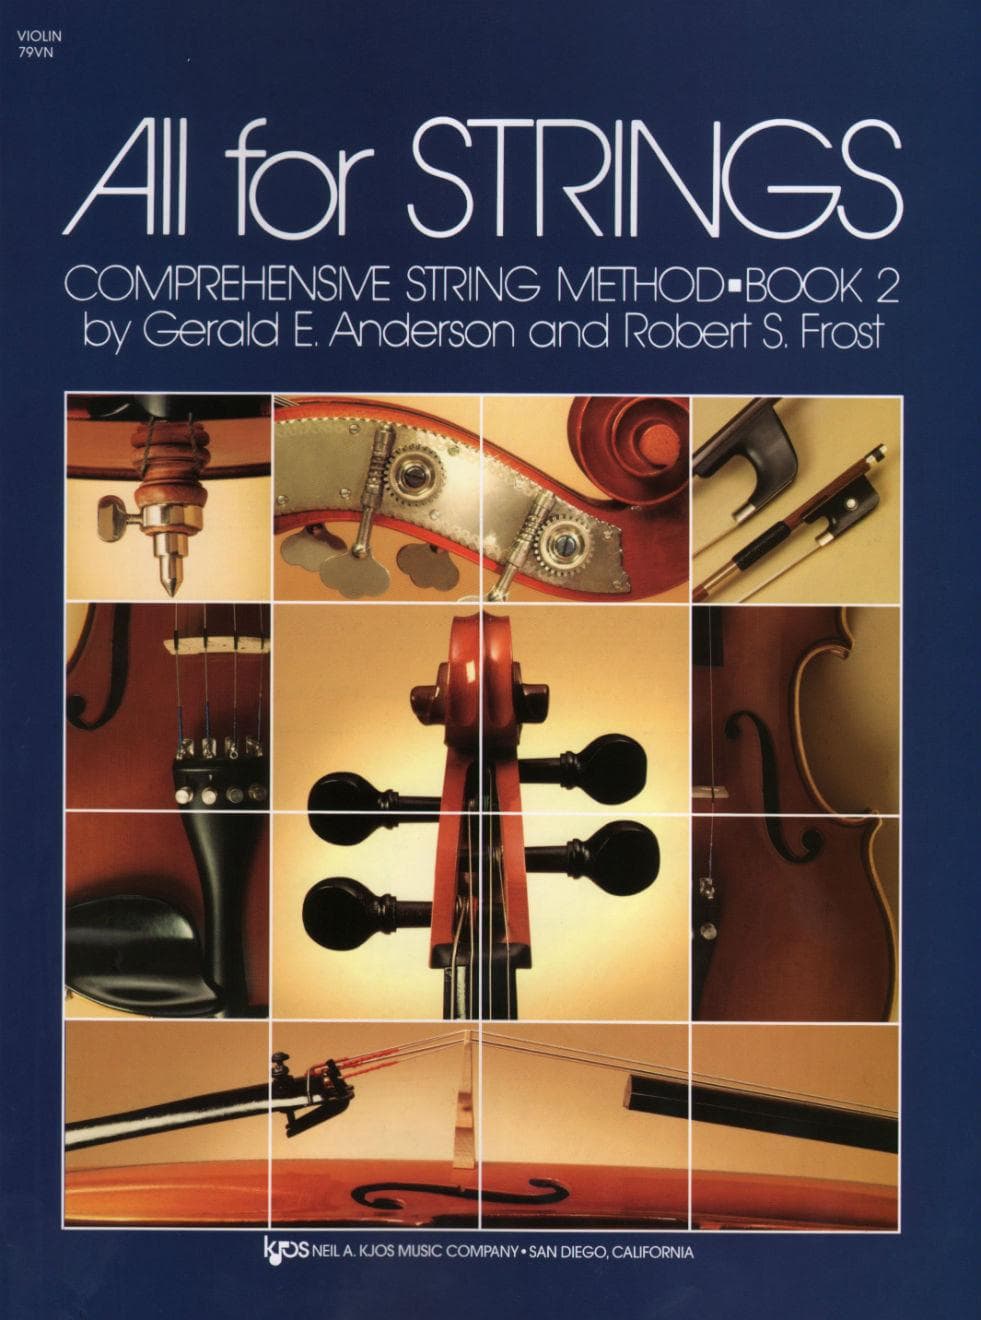 All For Strings Comprehensive String Method - Book 2 for Violin by Gerald E Anderson and Robert S Frost